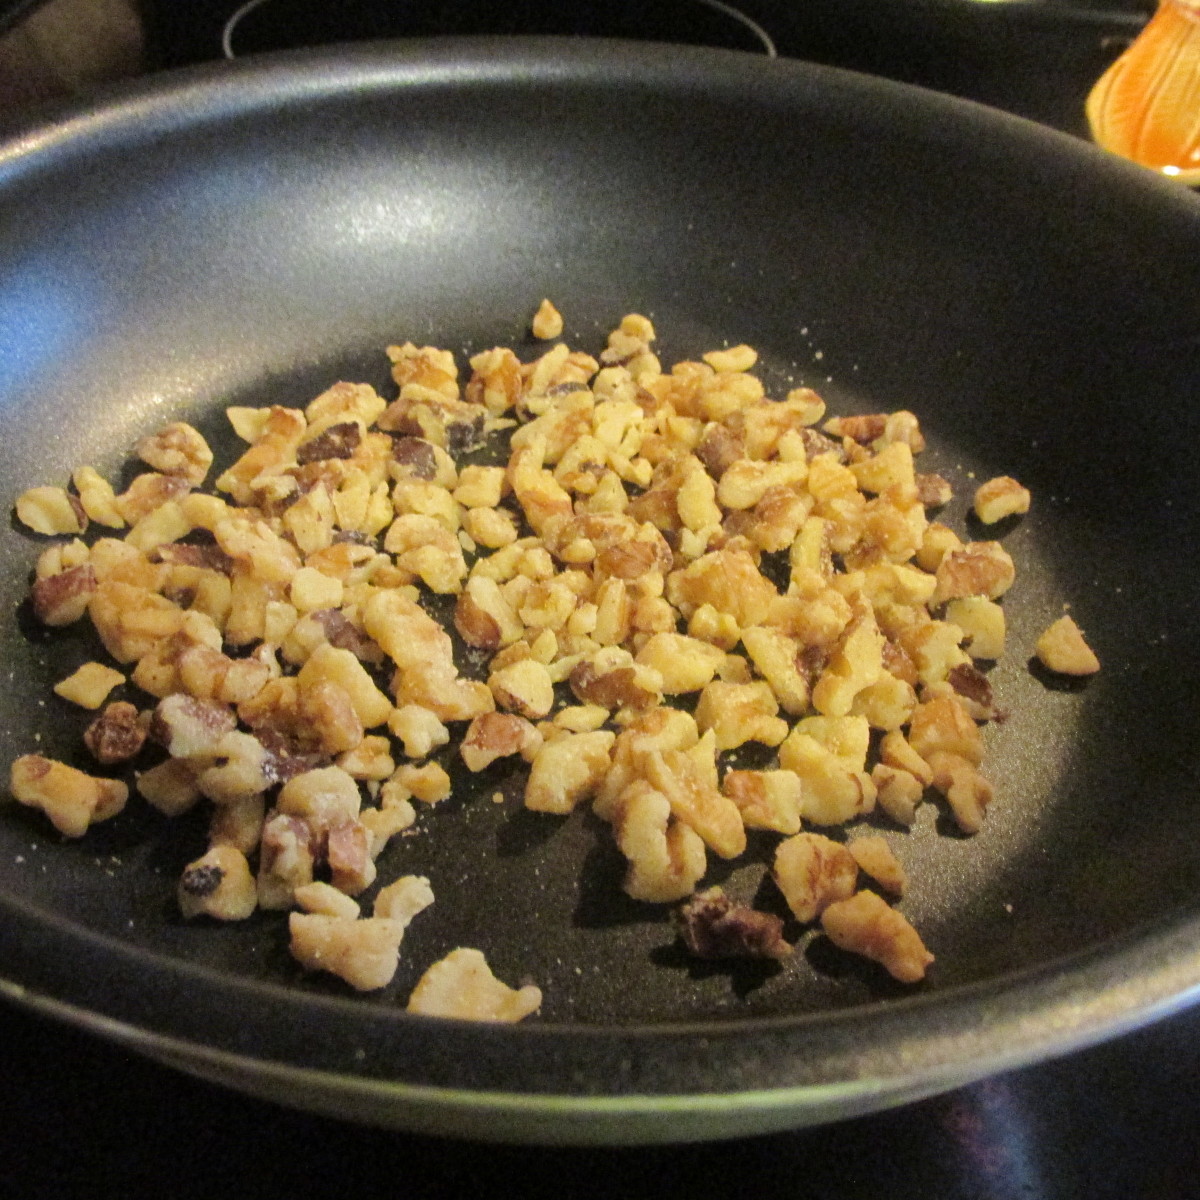 Walnuts toasting in a small pan